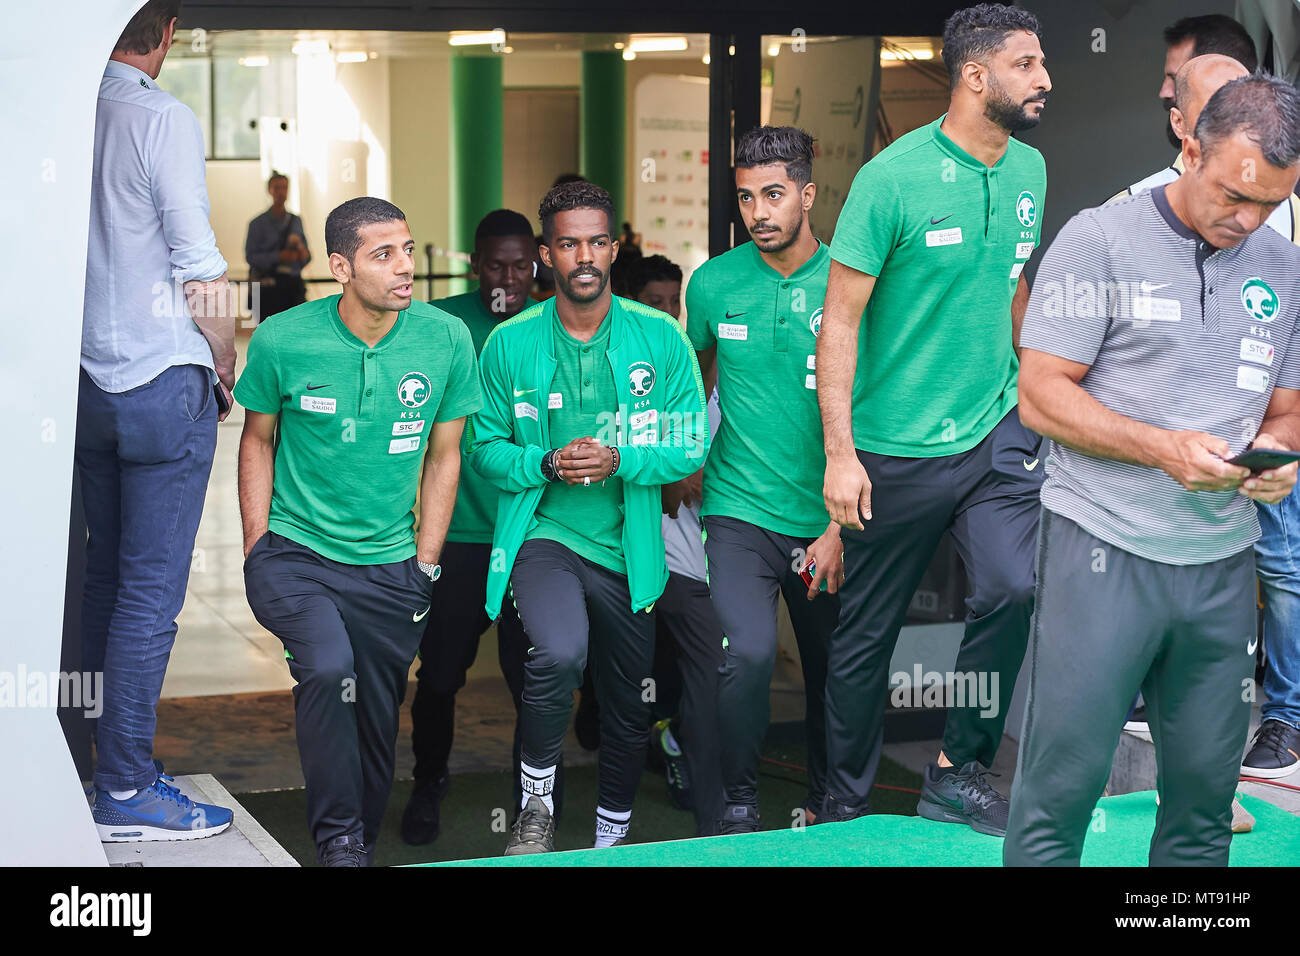 St. Gallen, Switzerland. 28th May 2018. Saudi team enters the stadium at the football World Cup 2018 preparation match Italy vs. Saudi Arabia in St. Gallen. The national team from Saudi Arabia is using the game to prepare for the 2018 FIFA World Cup final tournament in Russia while Italy did not qualify for the World Cup finals. Stock Photo